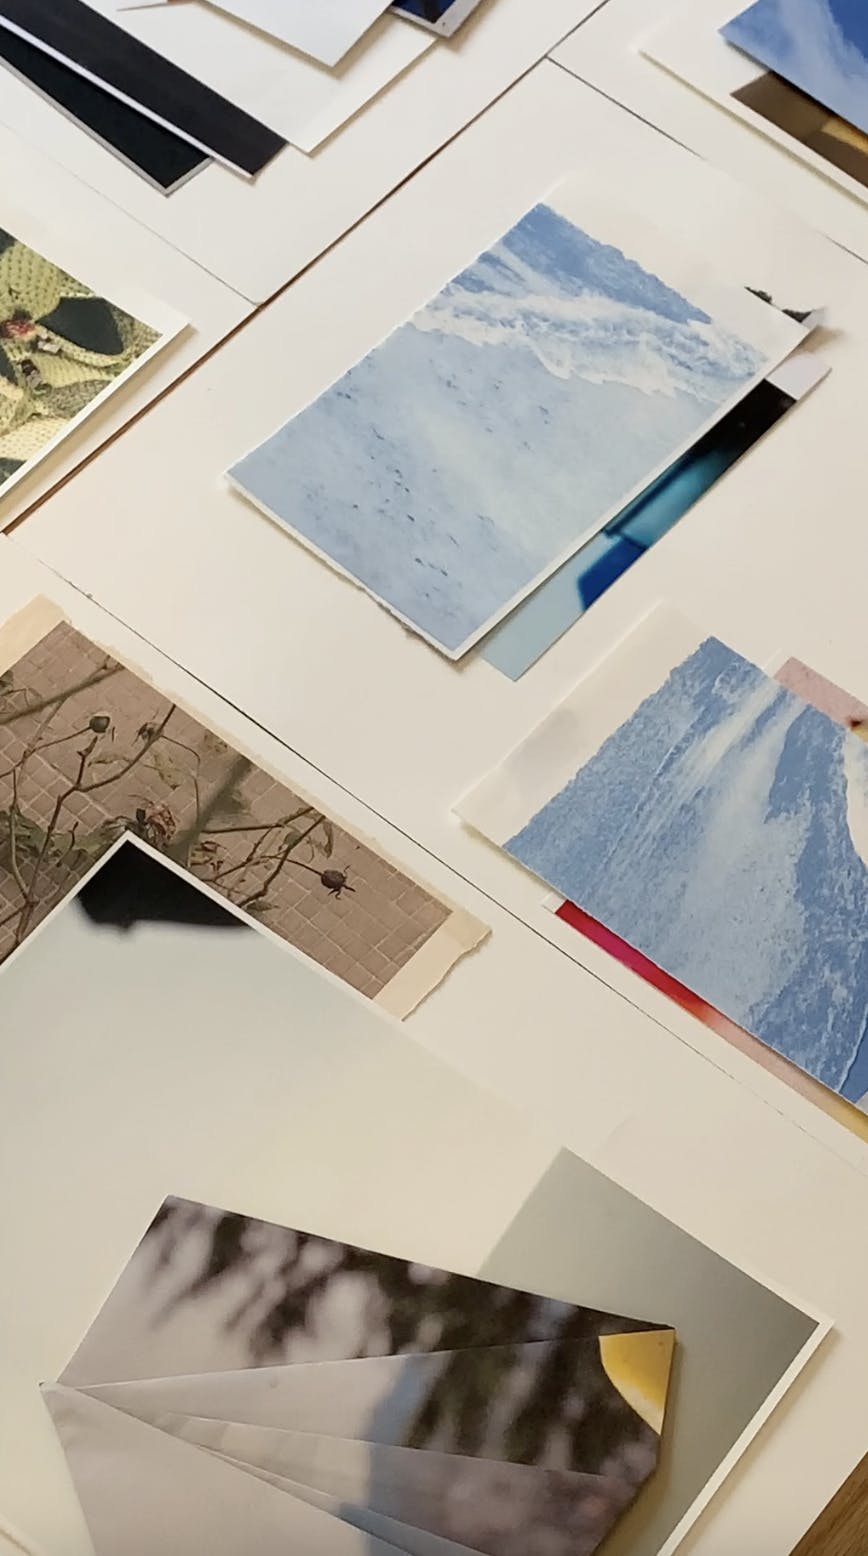 Layered groupings of prints and photographs by artist Carmen Vela on a white table in her studio.